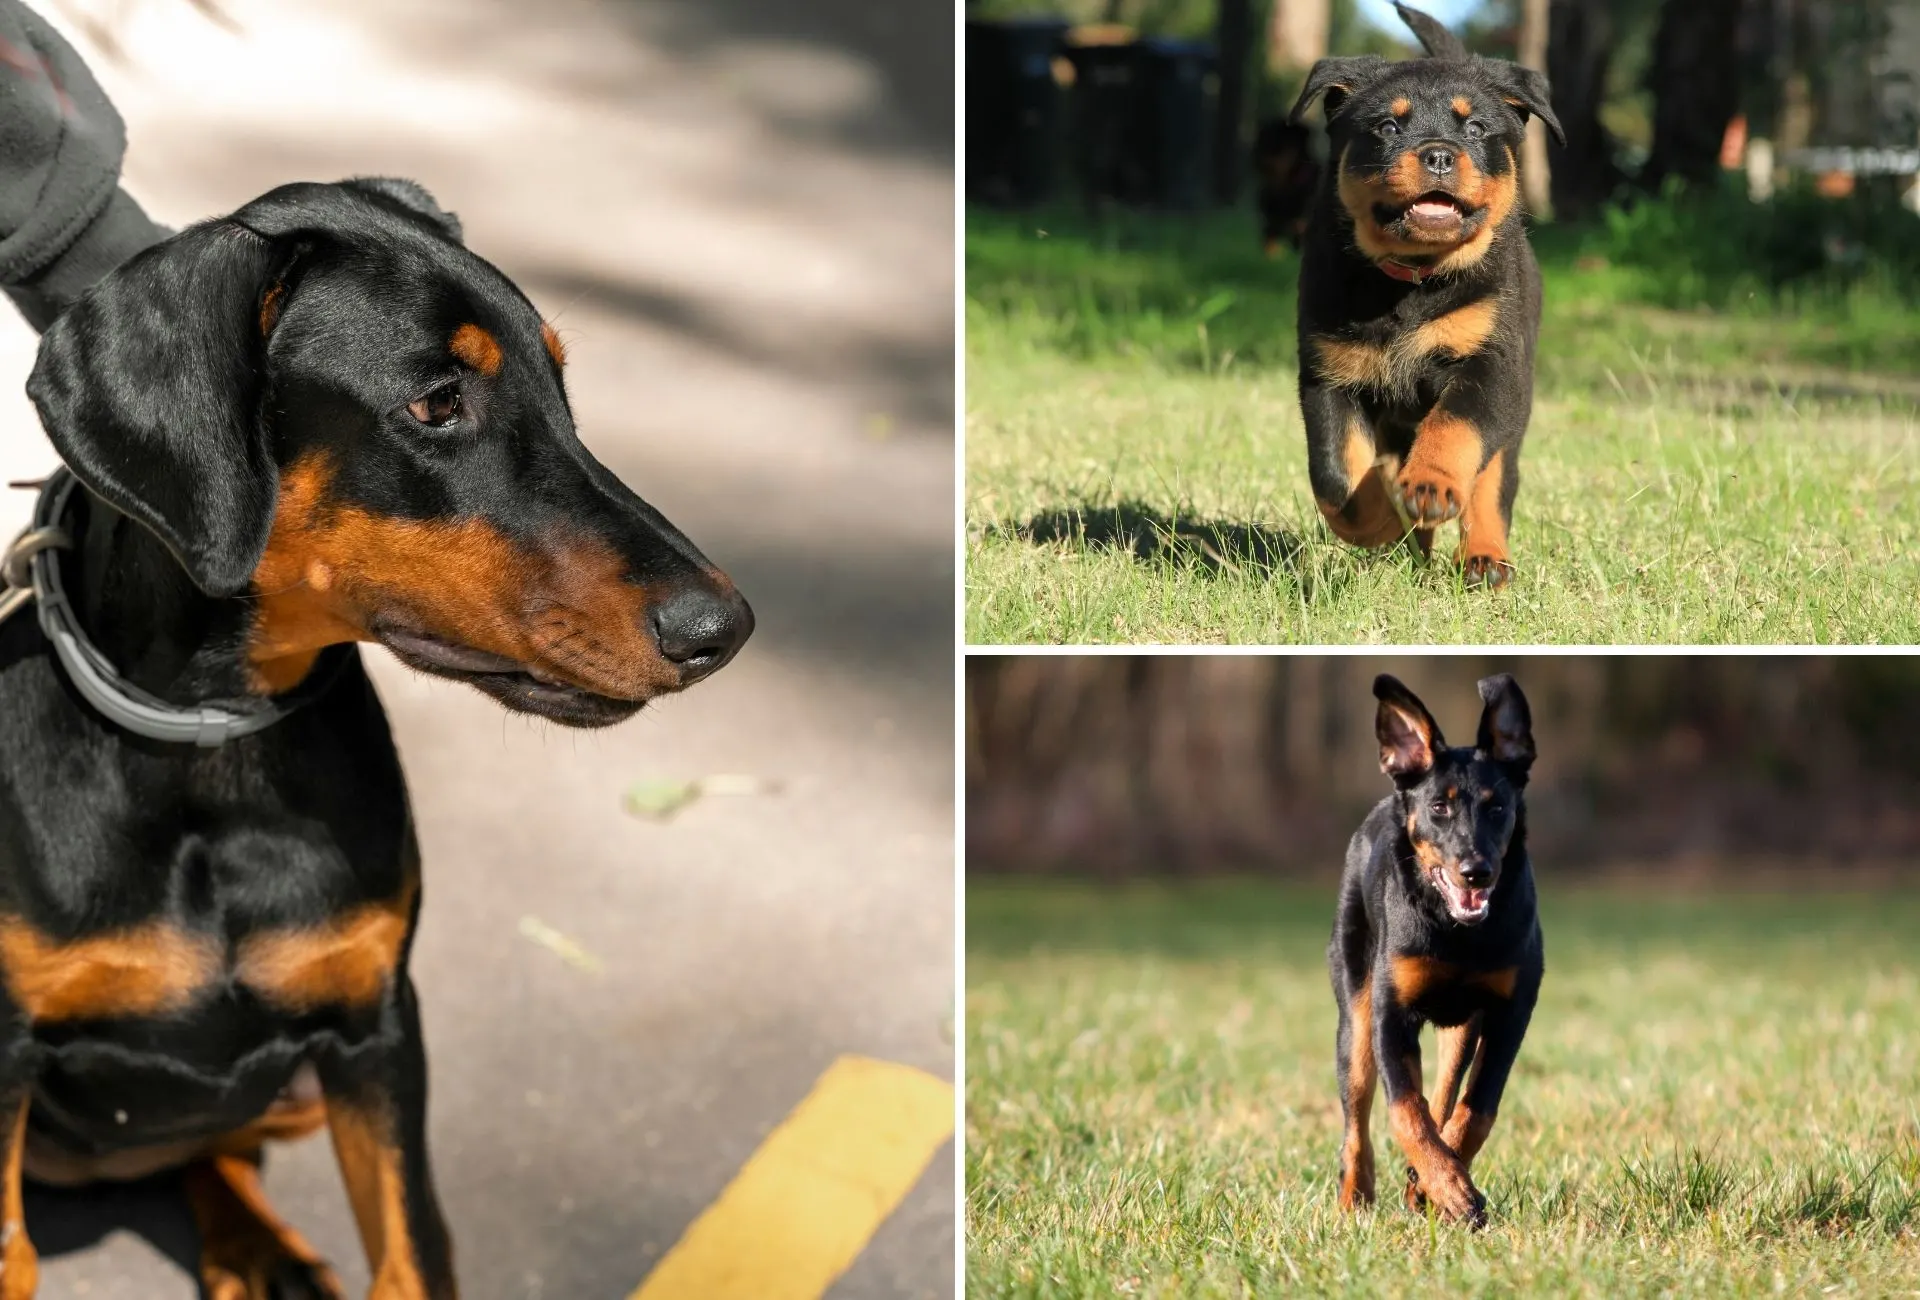 Doberman on the right side and a Rottweiler and Beauceron puppy on the right running on the grass.